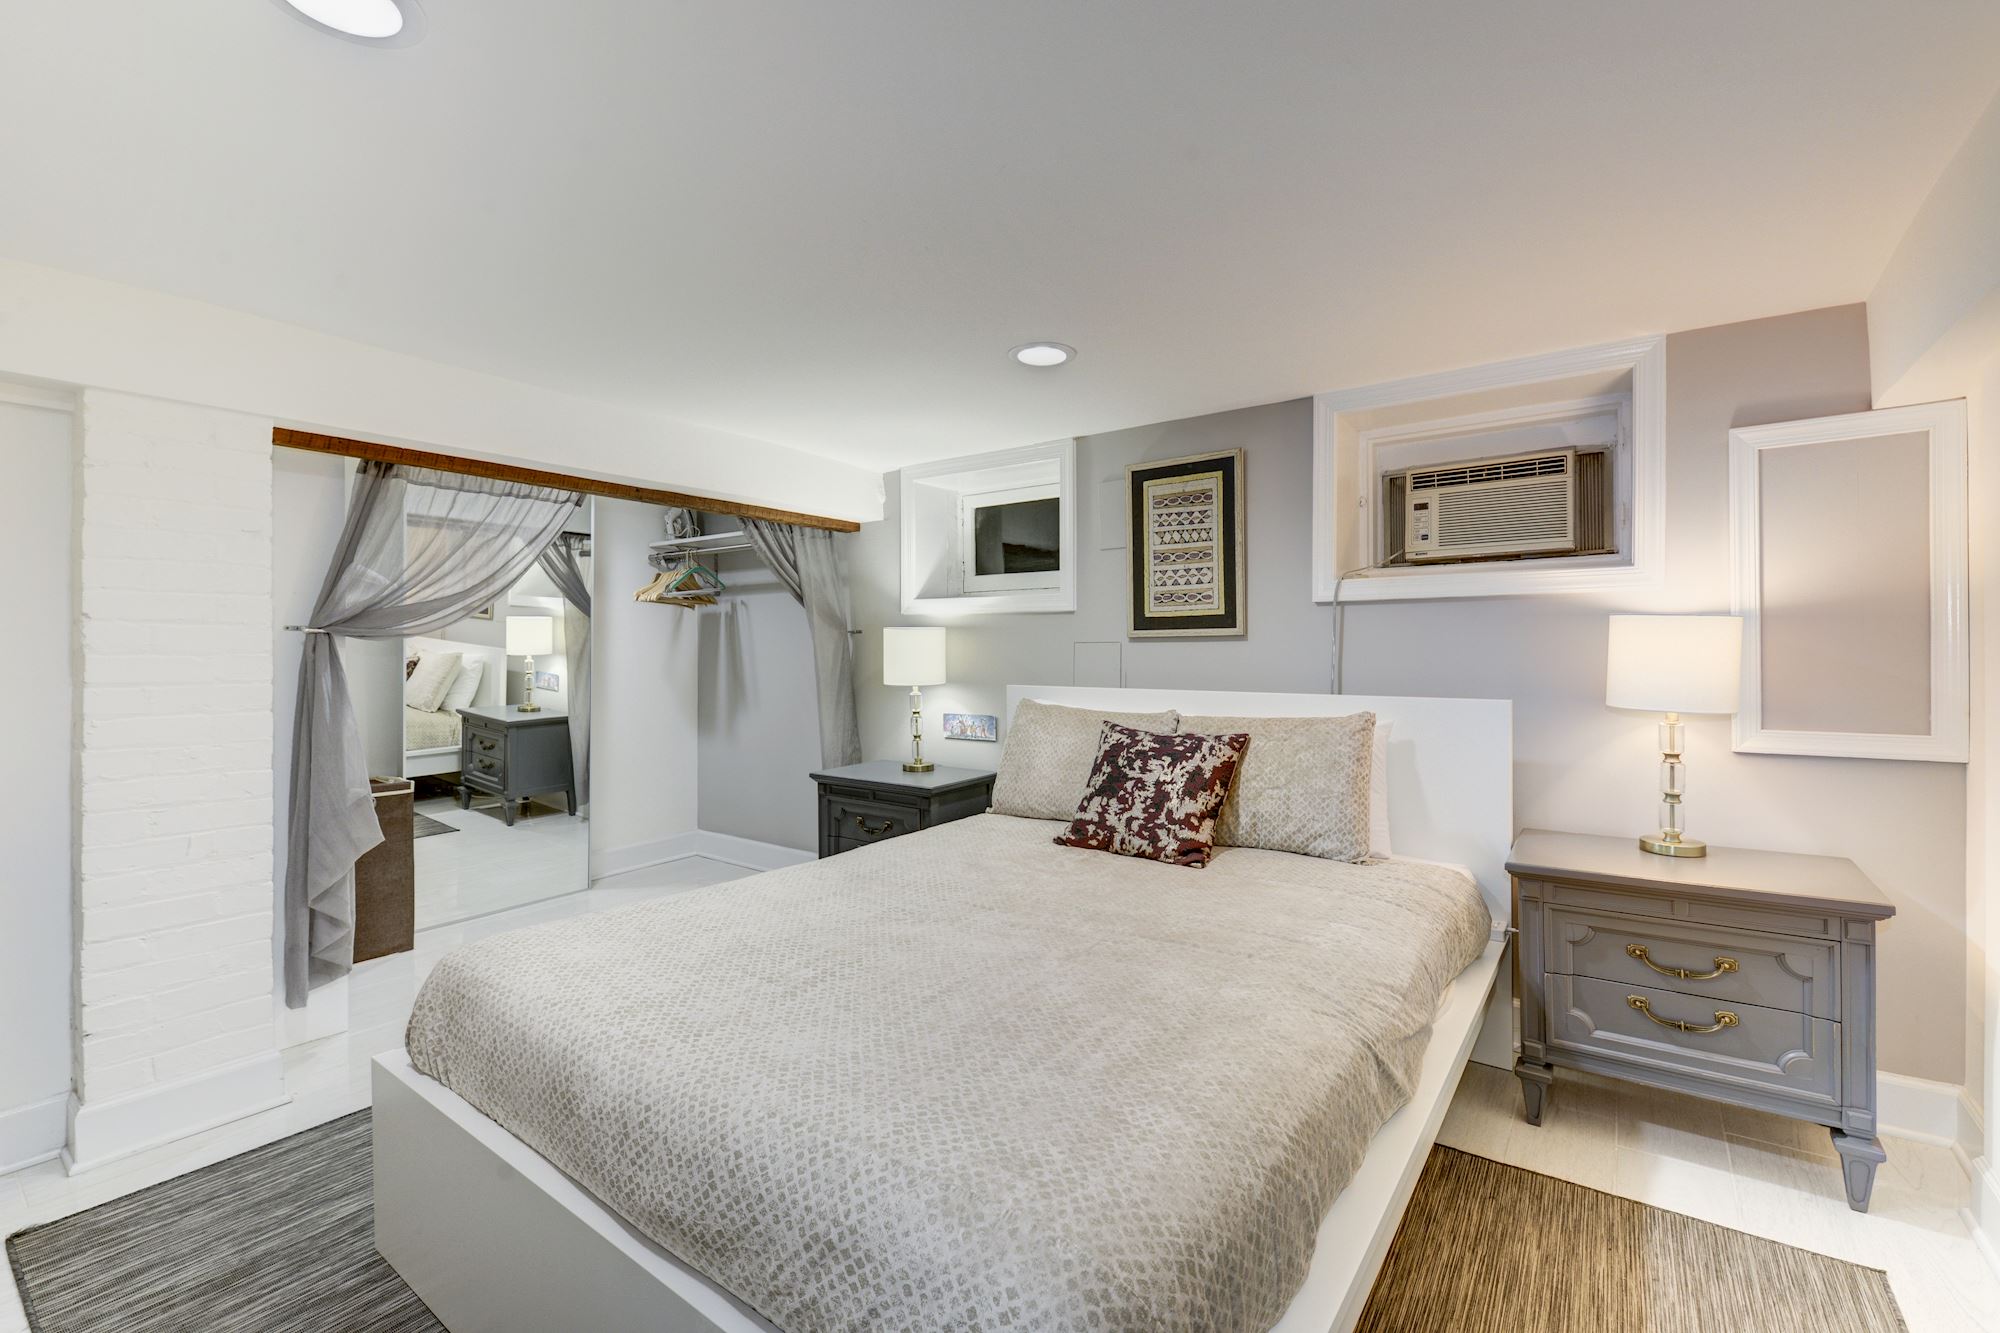 This guest suite houses a 6th bedroom and 3rd full bath for the house.